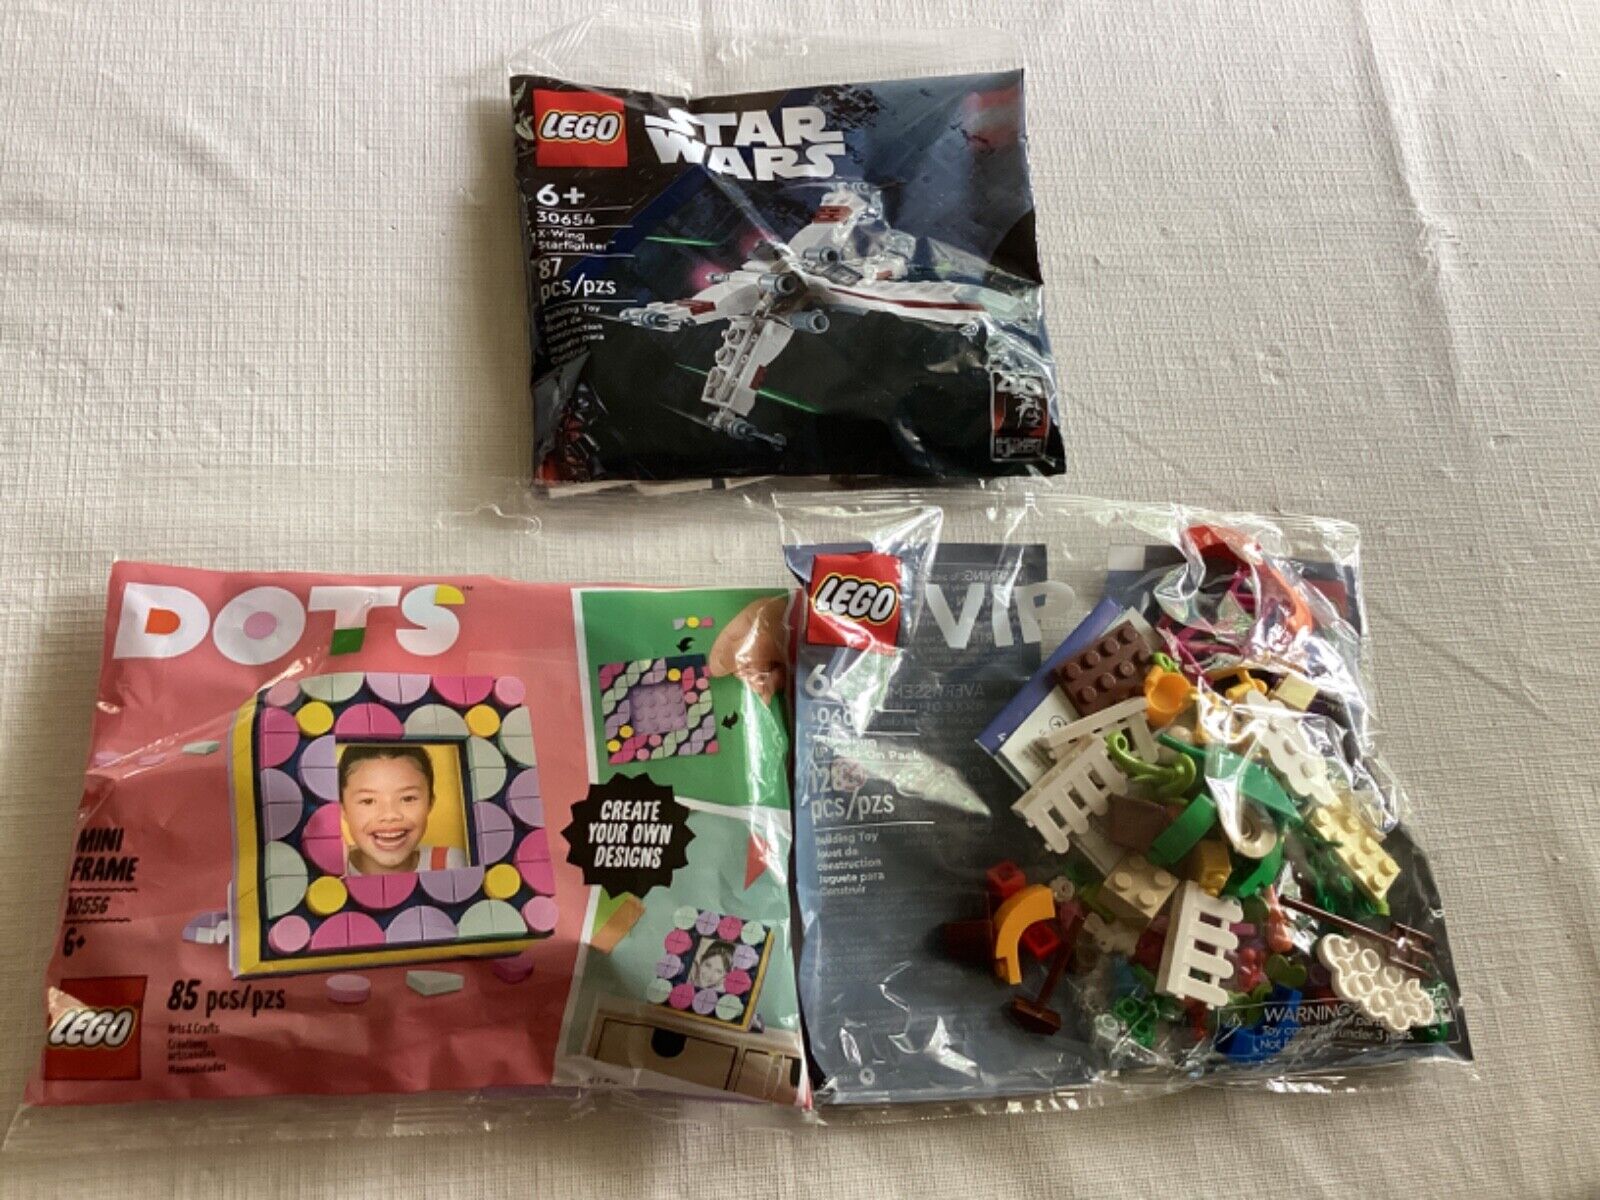 NEW LEGO POLYBAG LOT OF 3 SETS:  X-WING, DOTS FRAME, VIP SPRING FUN PACK!!